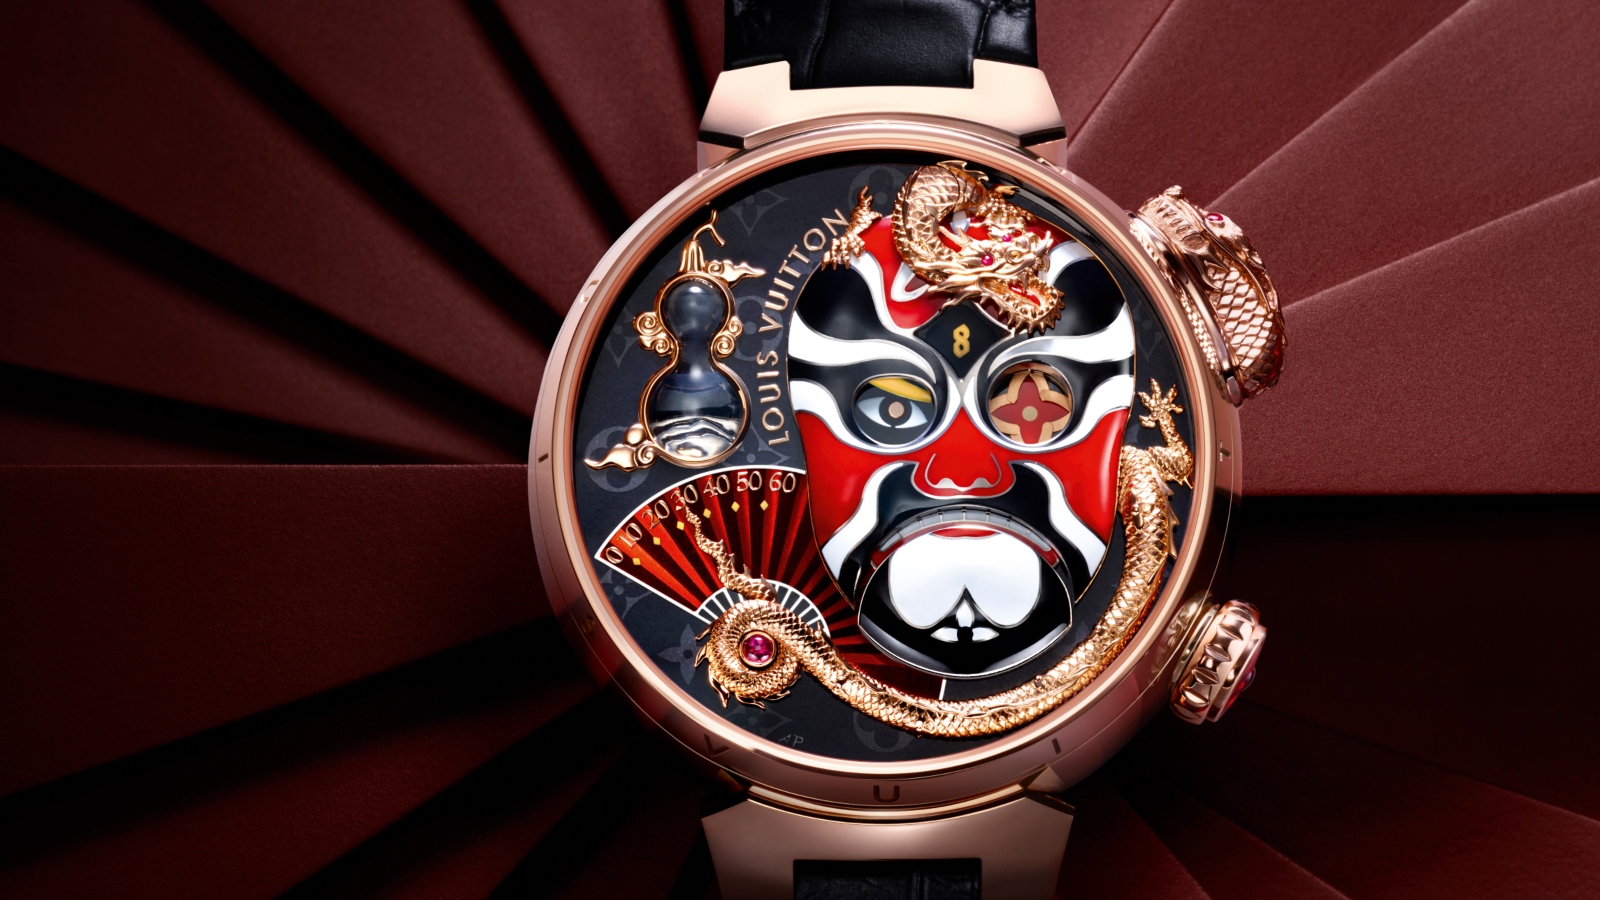 Louis Vuitton's Tambour Timepieces Reflect High Watchmaking At Its